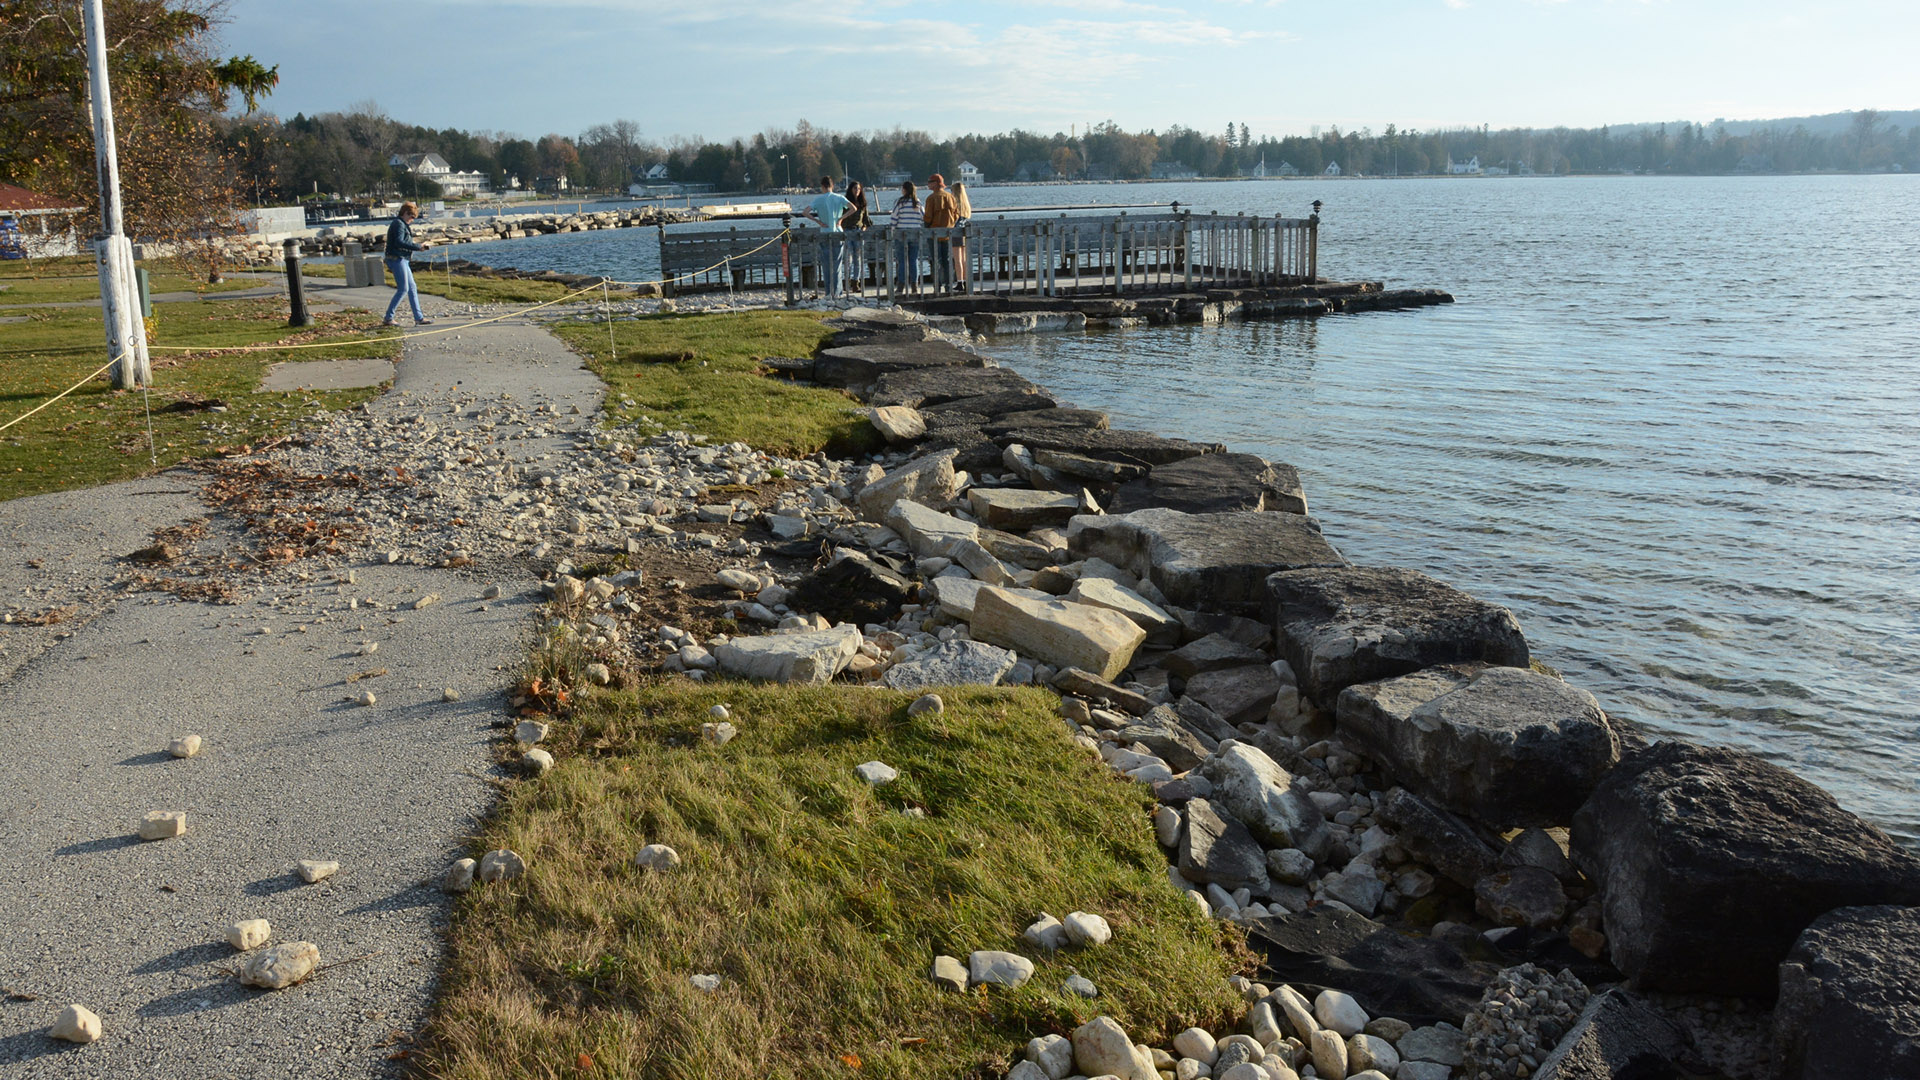 Pedestrians stand on a waterfront pier in the background with rocks strewn across a walkway and lawn in the foreground.